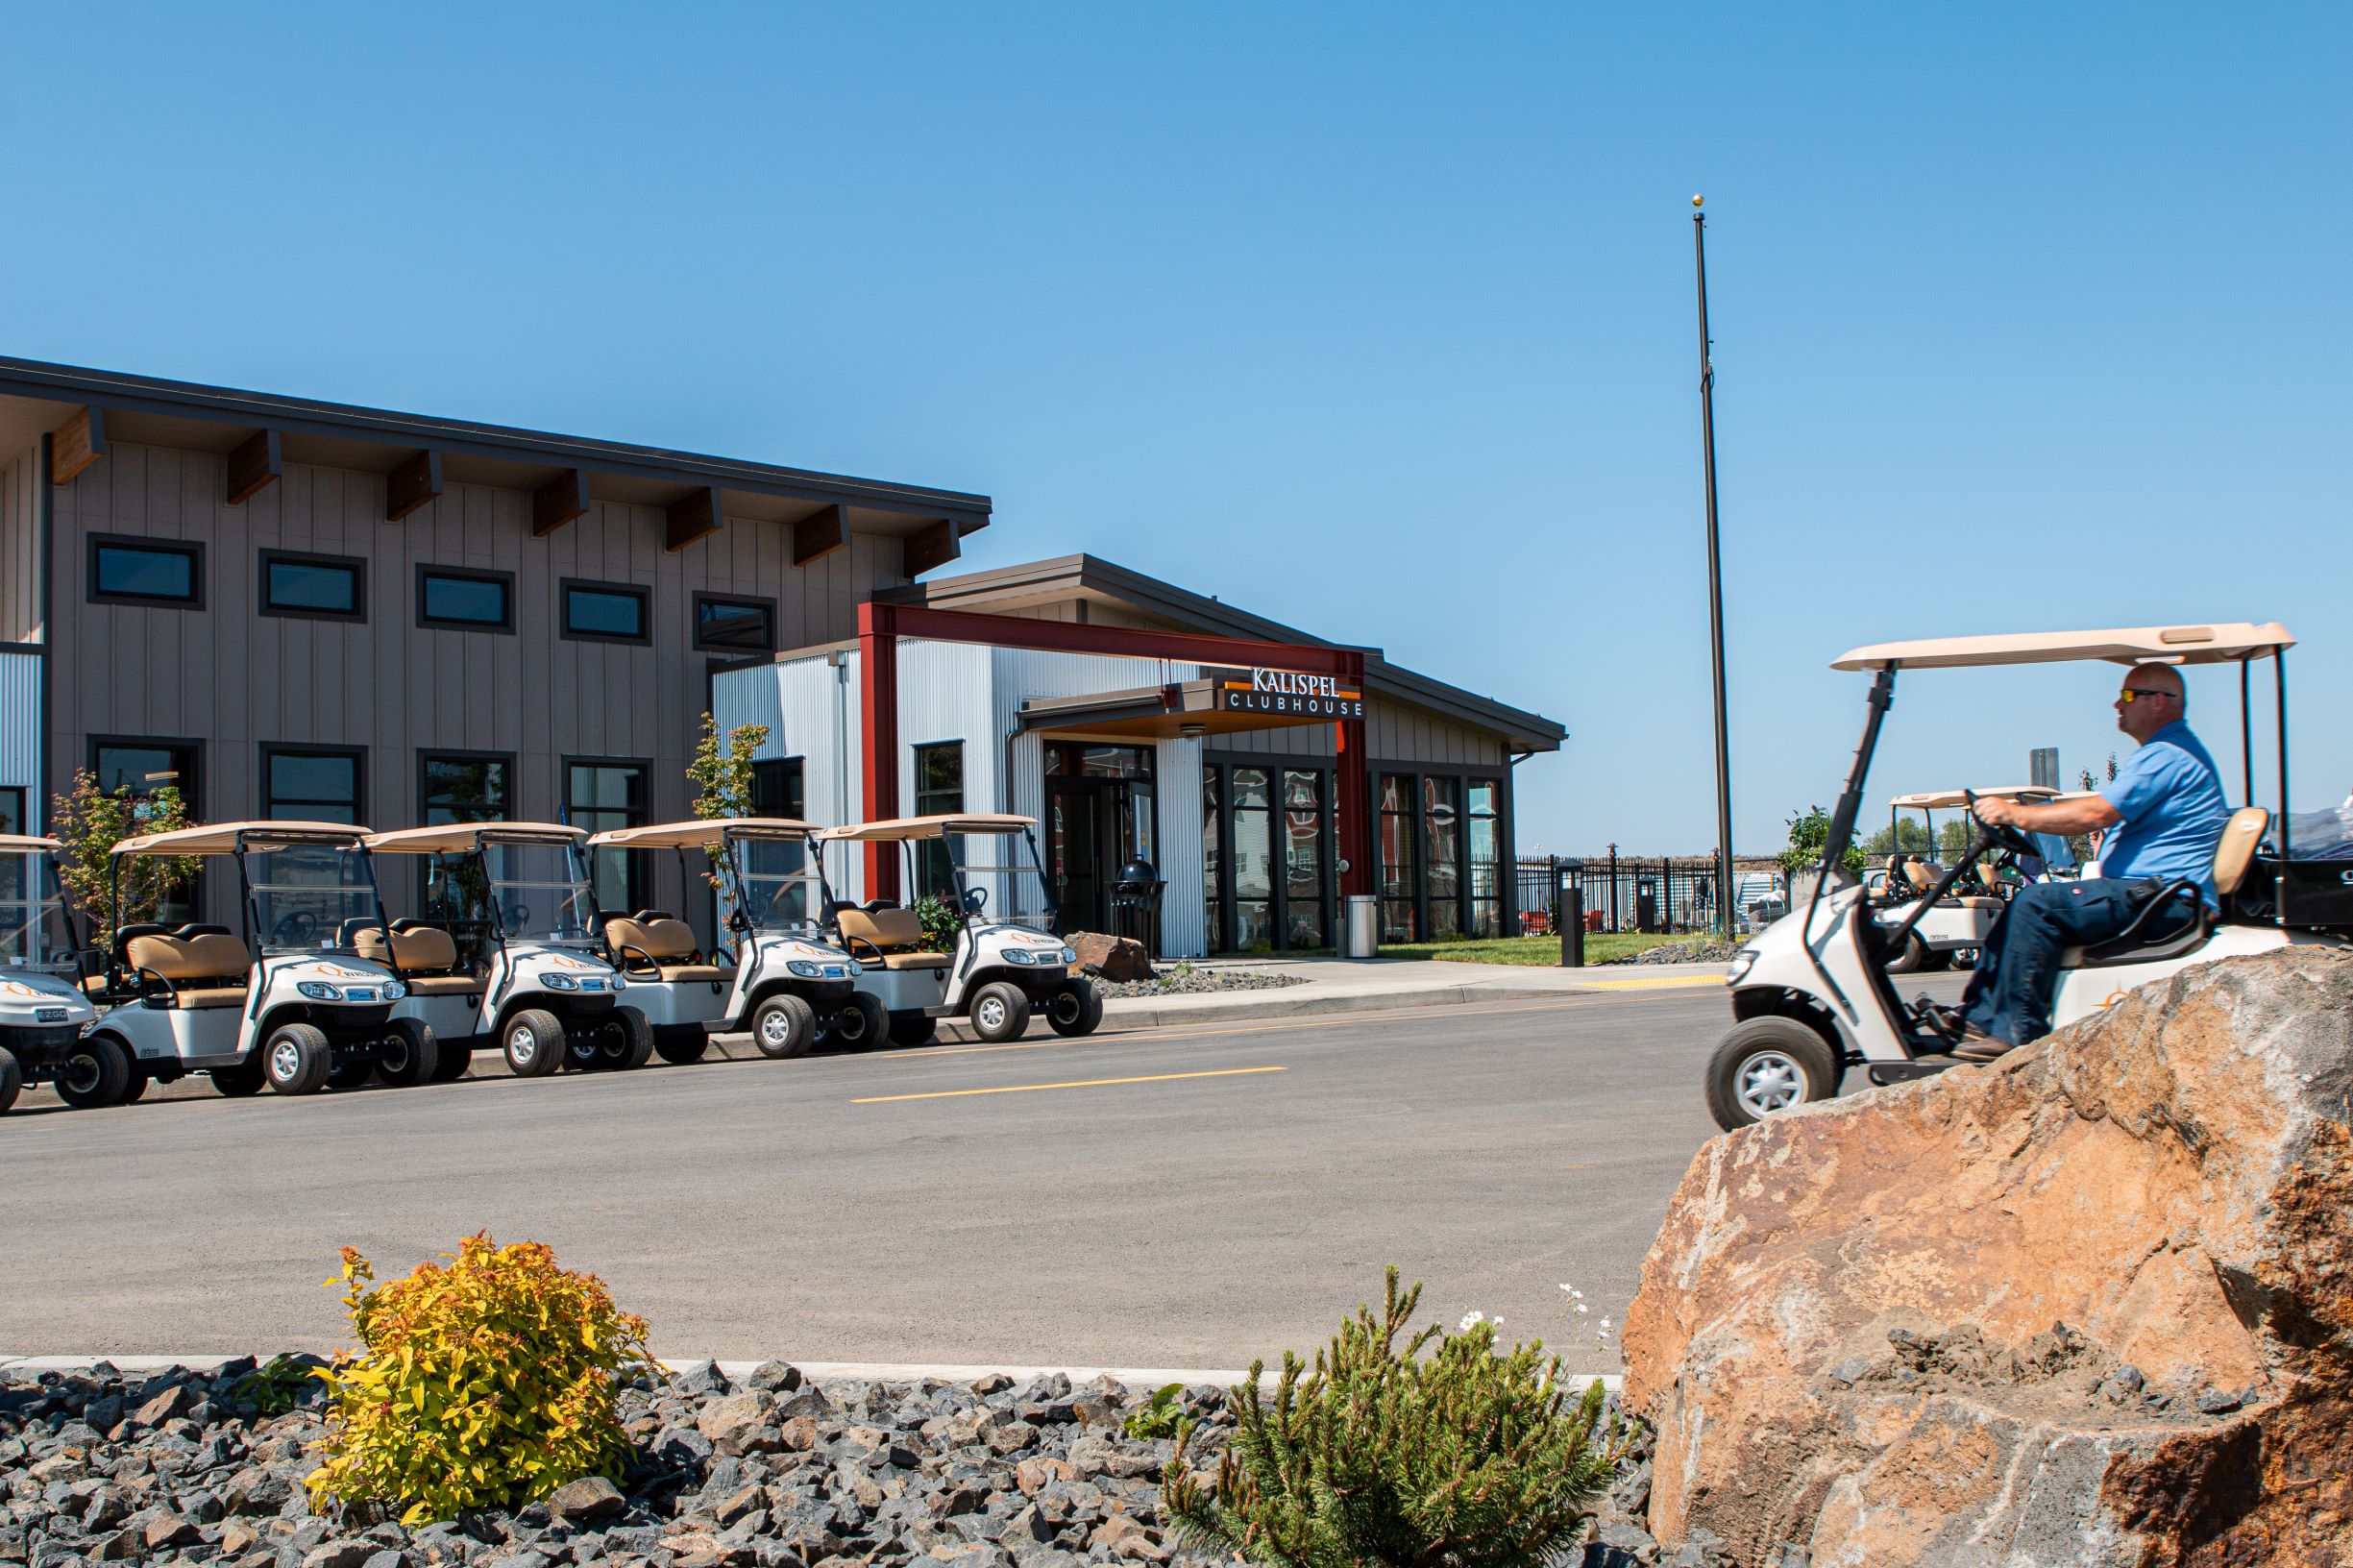 A line of golf cars parked in front of a Northern Quest building.